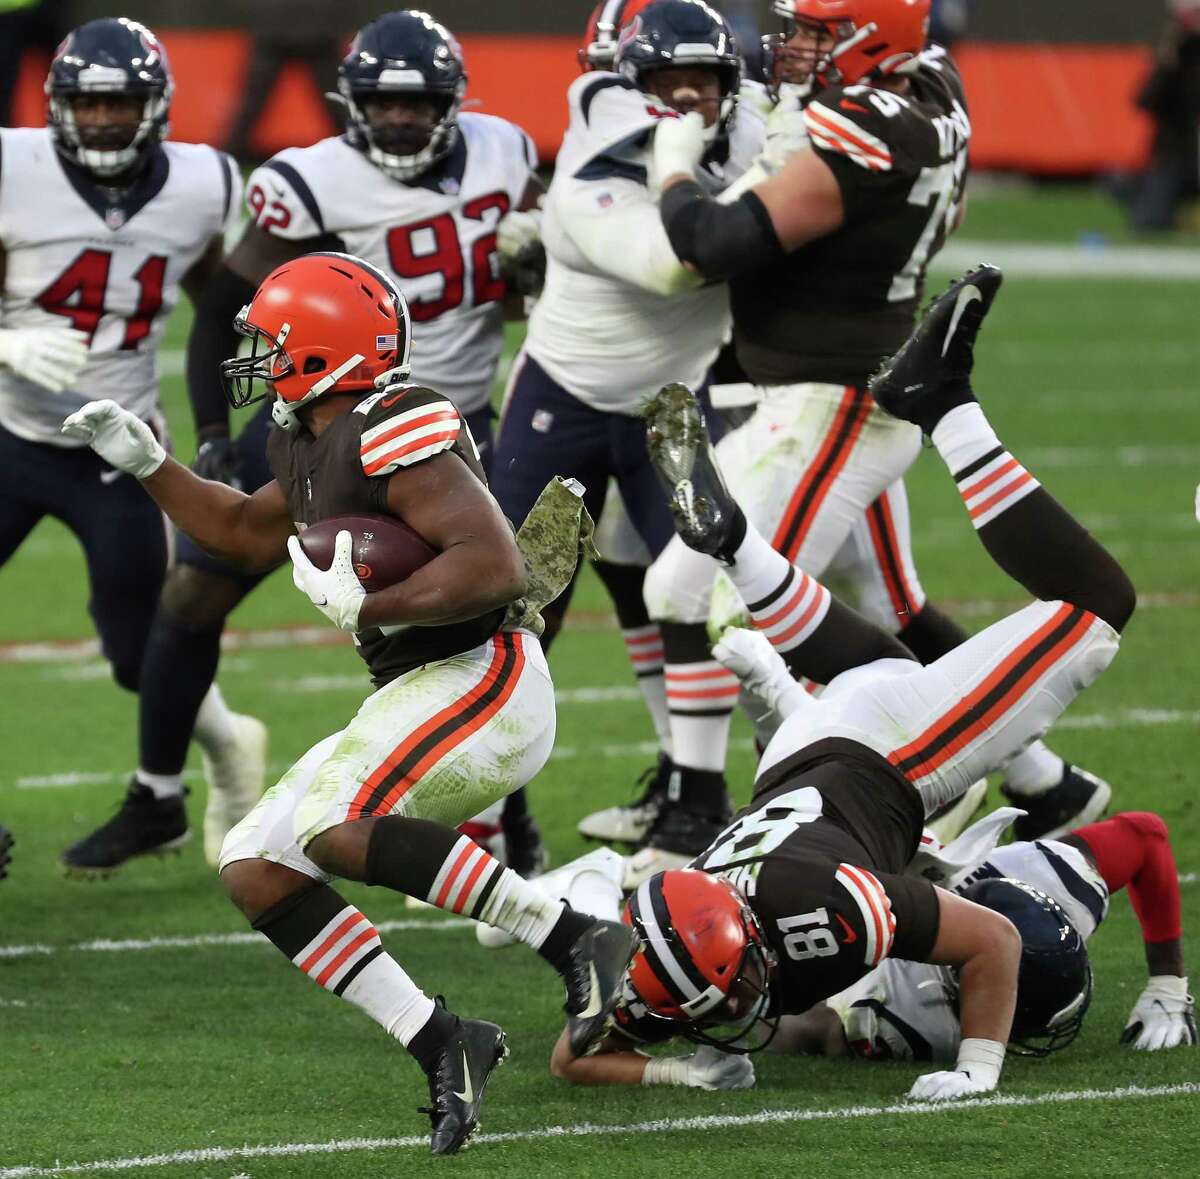 Cleveland Browns running back Nick Chubb (24) runs around the Houston Texans defense for a 59-yard run to put the game away during the fourth quarter of an NFL football game at FirstEnergy Stadium Sunday, Nov. 15, 2020, in Cleveland.